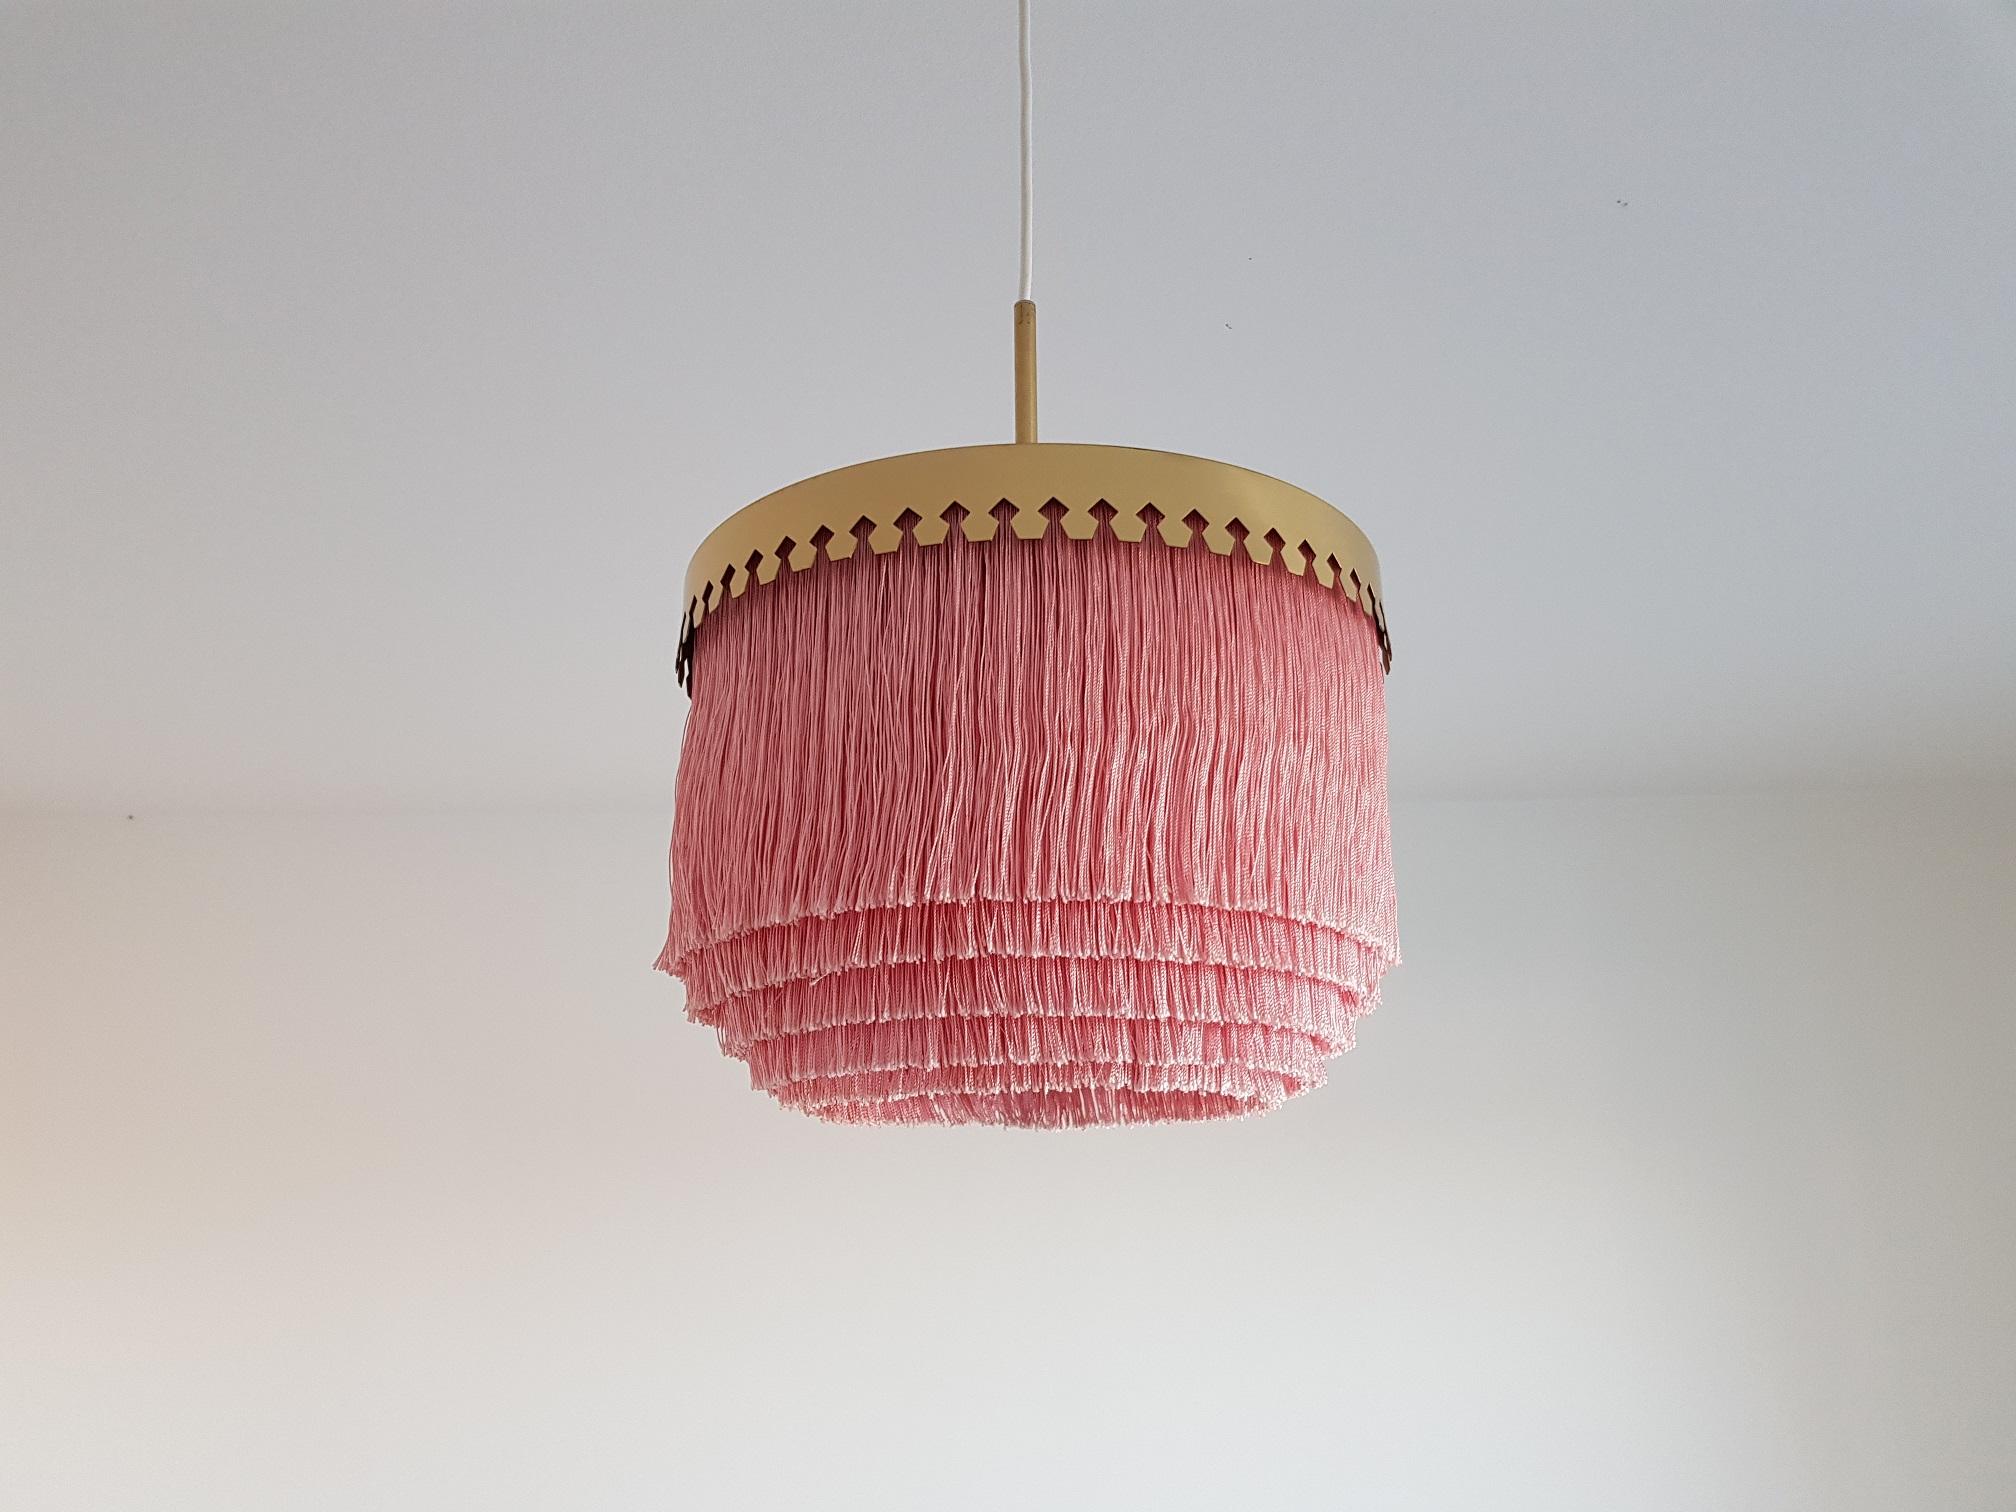 Vintage pink fringe lamp in brass. Produced in the 1960s by Hans-Agne Jakobsson AB in Markaryd Sweden. This famous ceiling lamp has had an unbelievable revival the last few years and is now found in the most iconic hotel lounges, private homes,